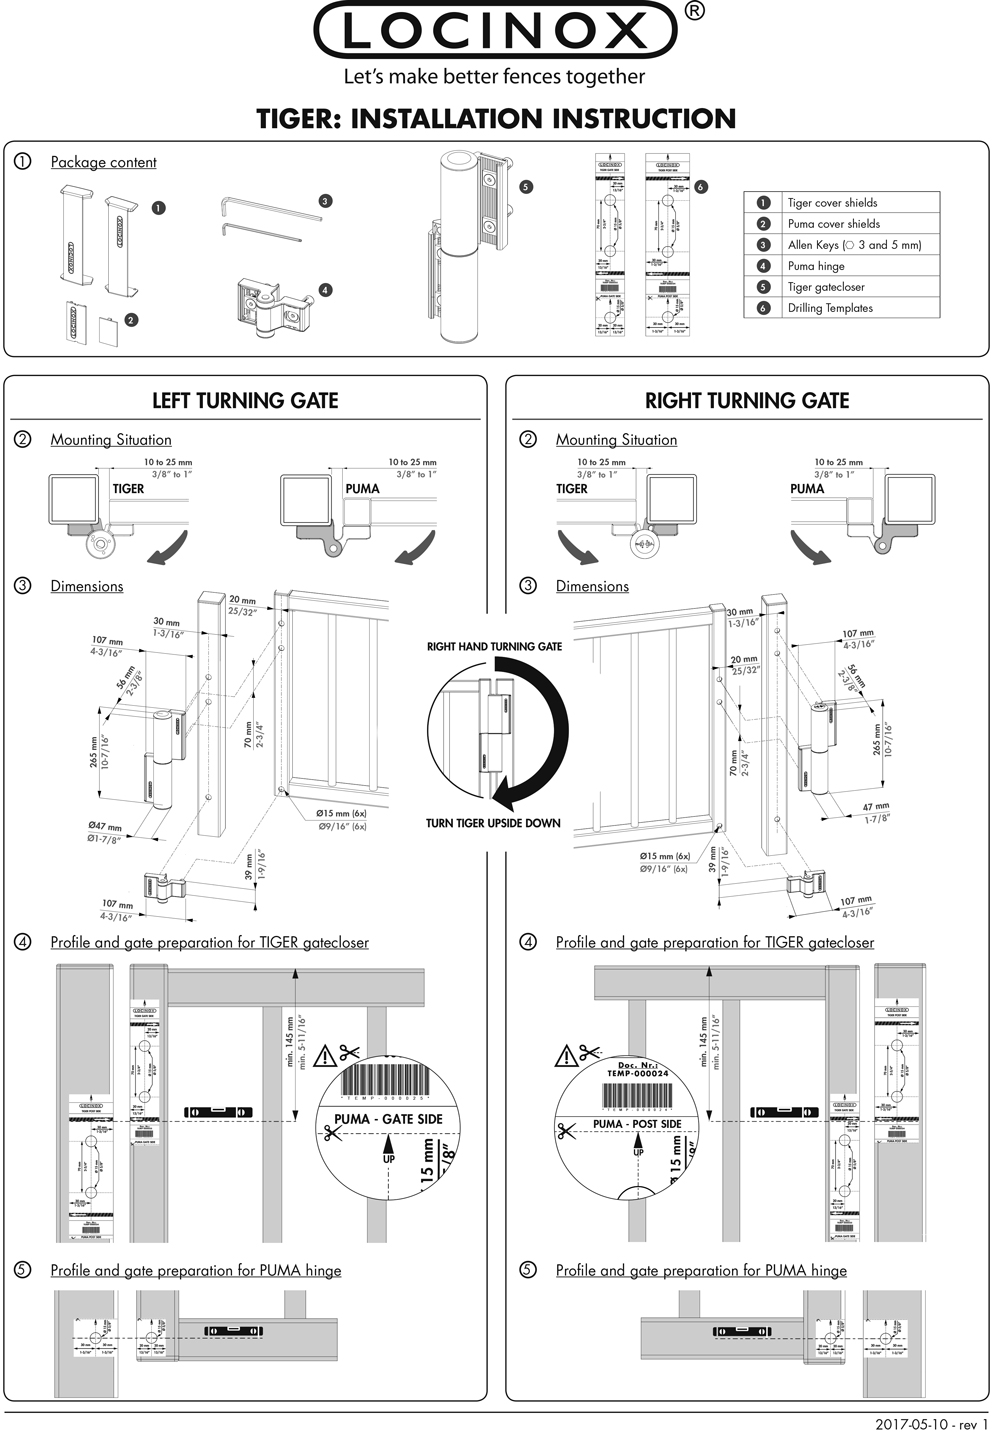 Installation Instructions for the Locinox Tiger/Puma Compact Hydraulic Gate Closer & Hinge